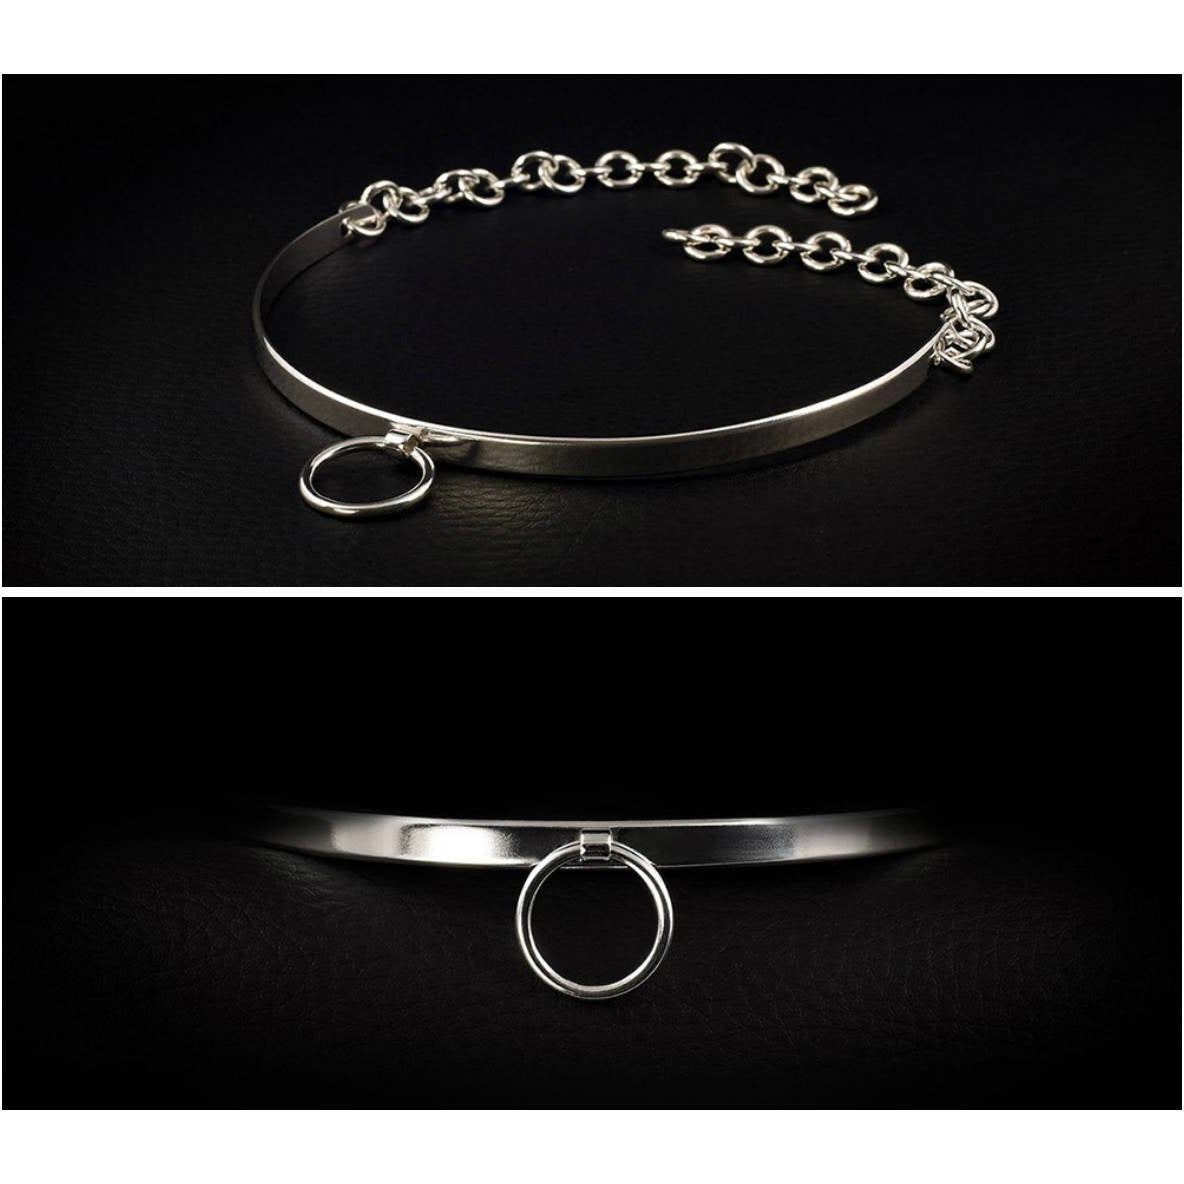 Sterling Silver-Elegant & Sexy Submissive Collar-BDSM O Ring & Padlock Clasp